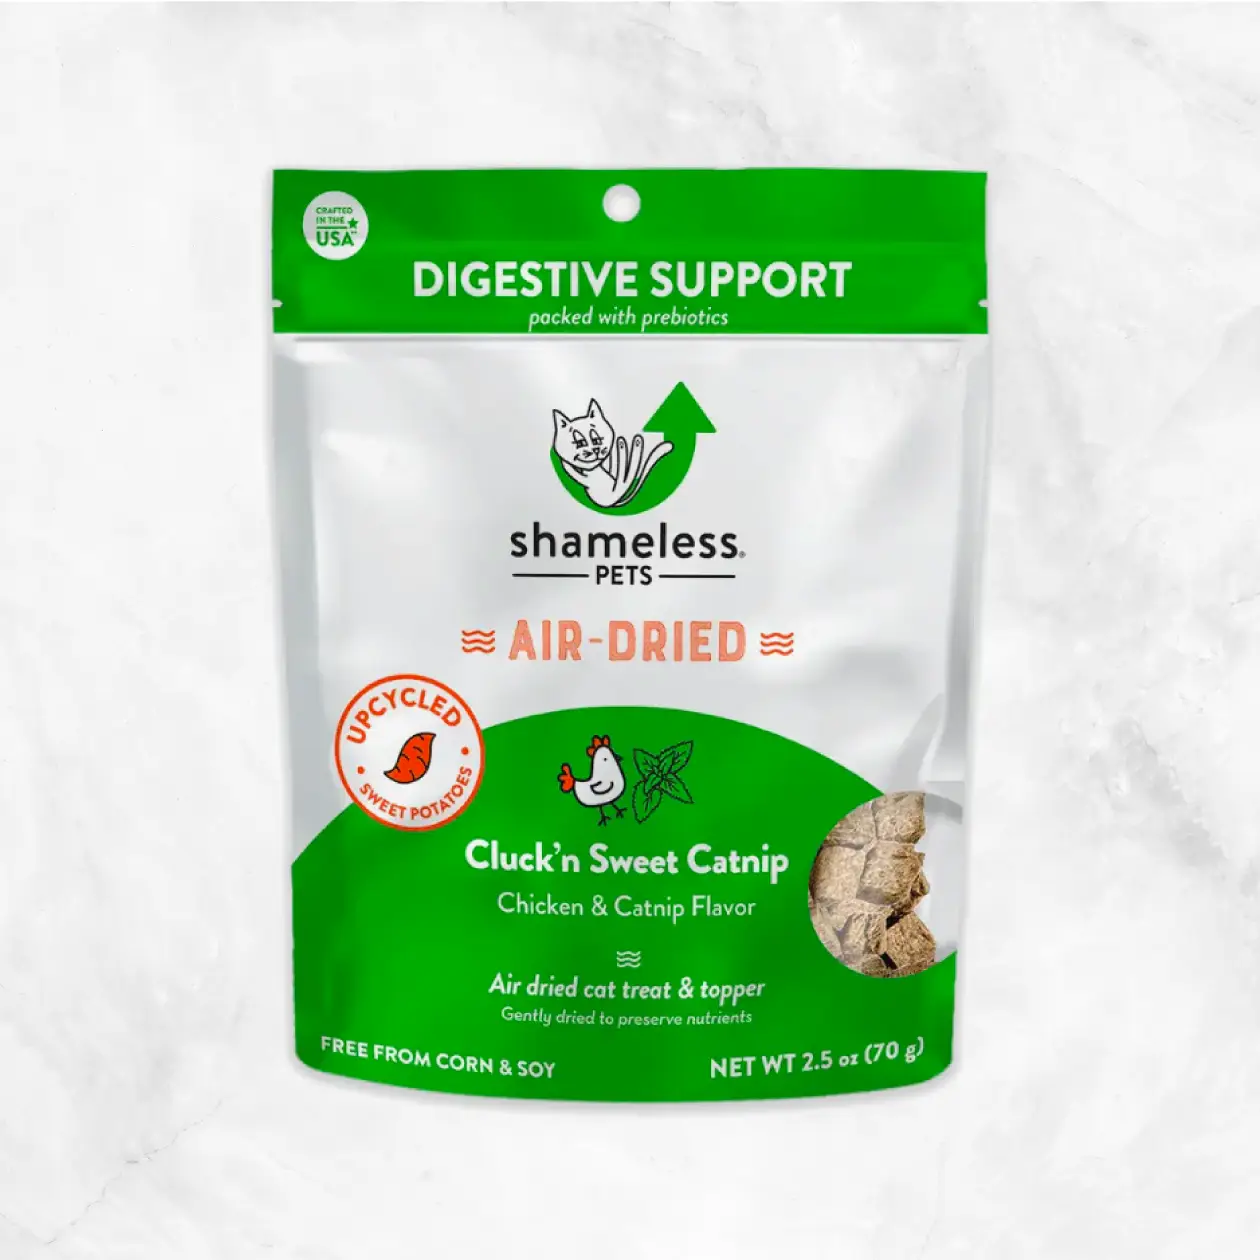 Cluck'n Sweet Catnip Air-Dried Cat Treat & Topper Delivery